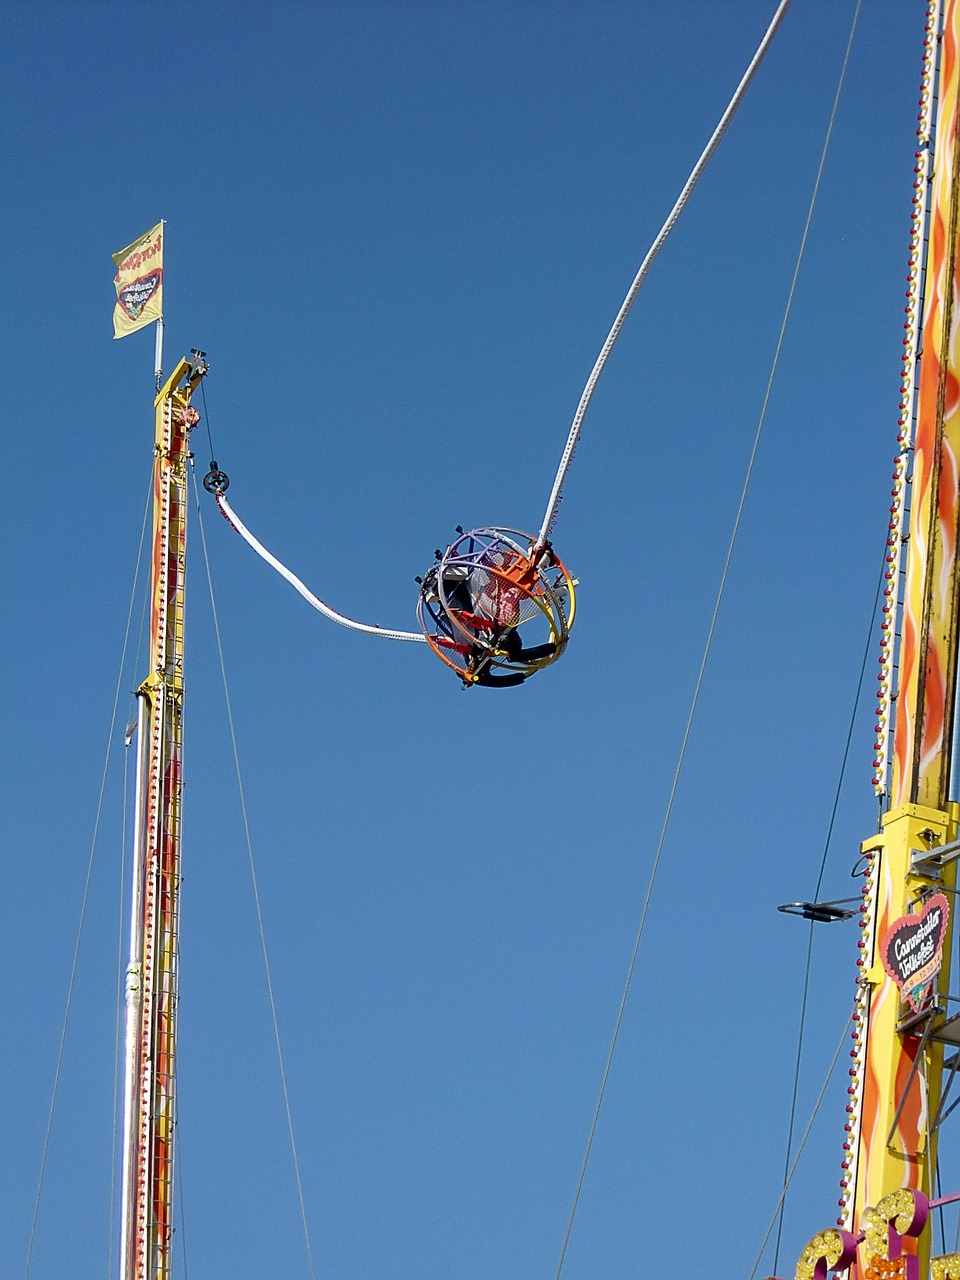 bungee system spin bungee free photo